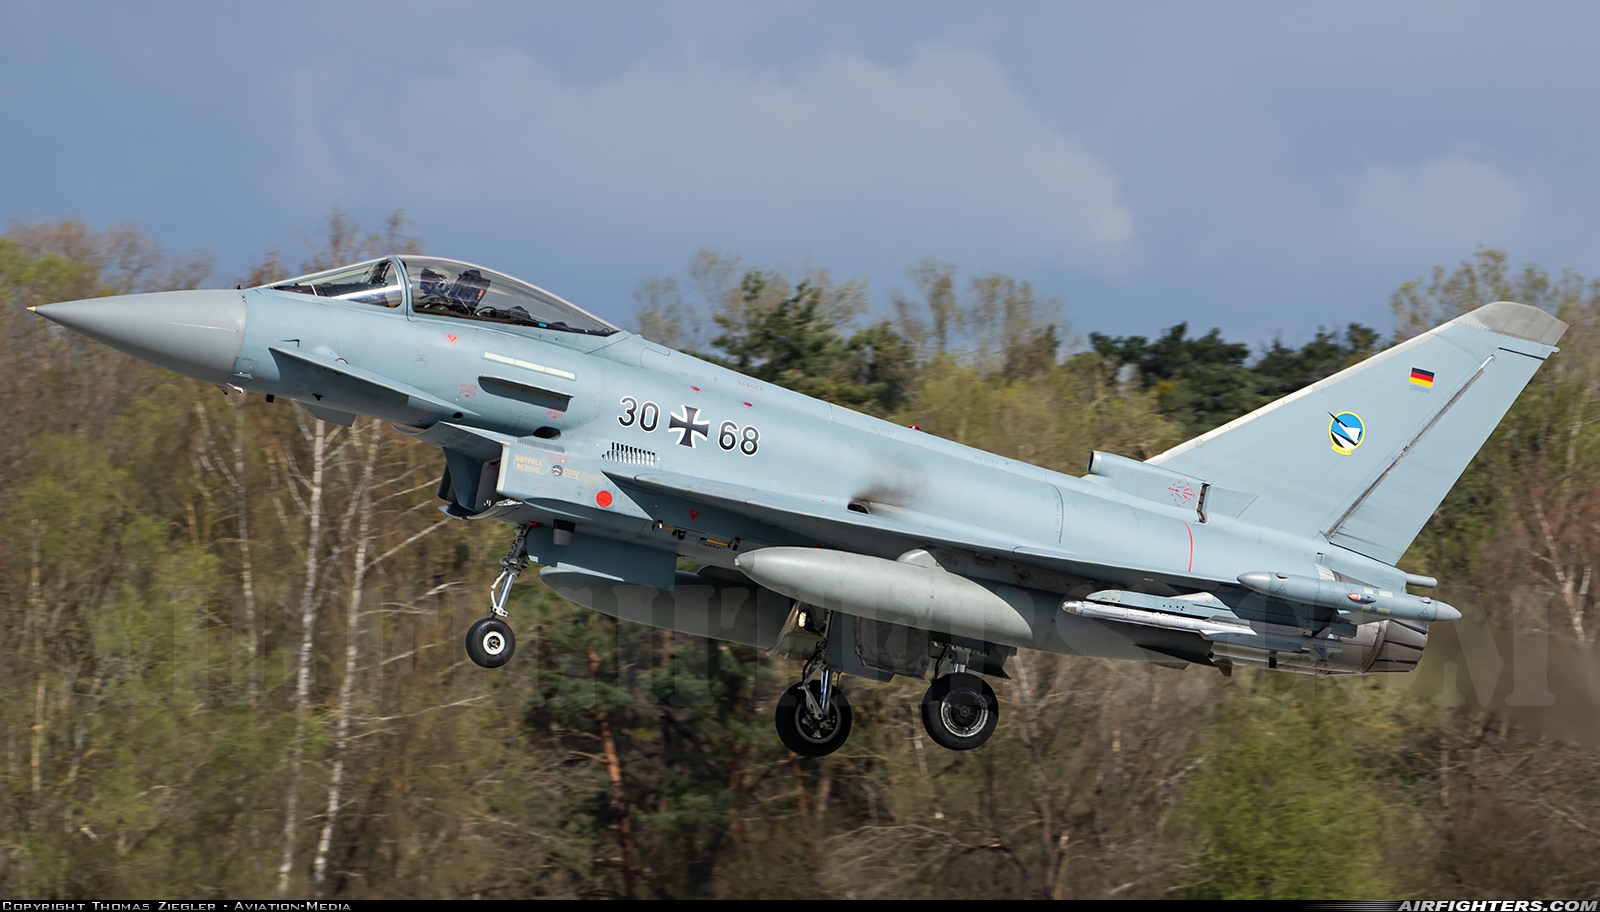 Germany - Air Force Eurofighter EF-2000 Typhoon S 30+68 at Ingolstadt - Manching (ETSI), Germany